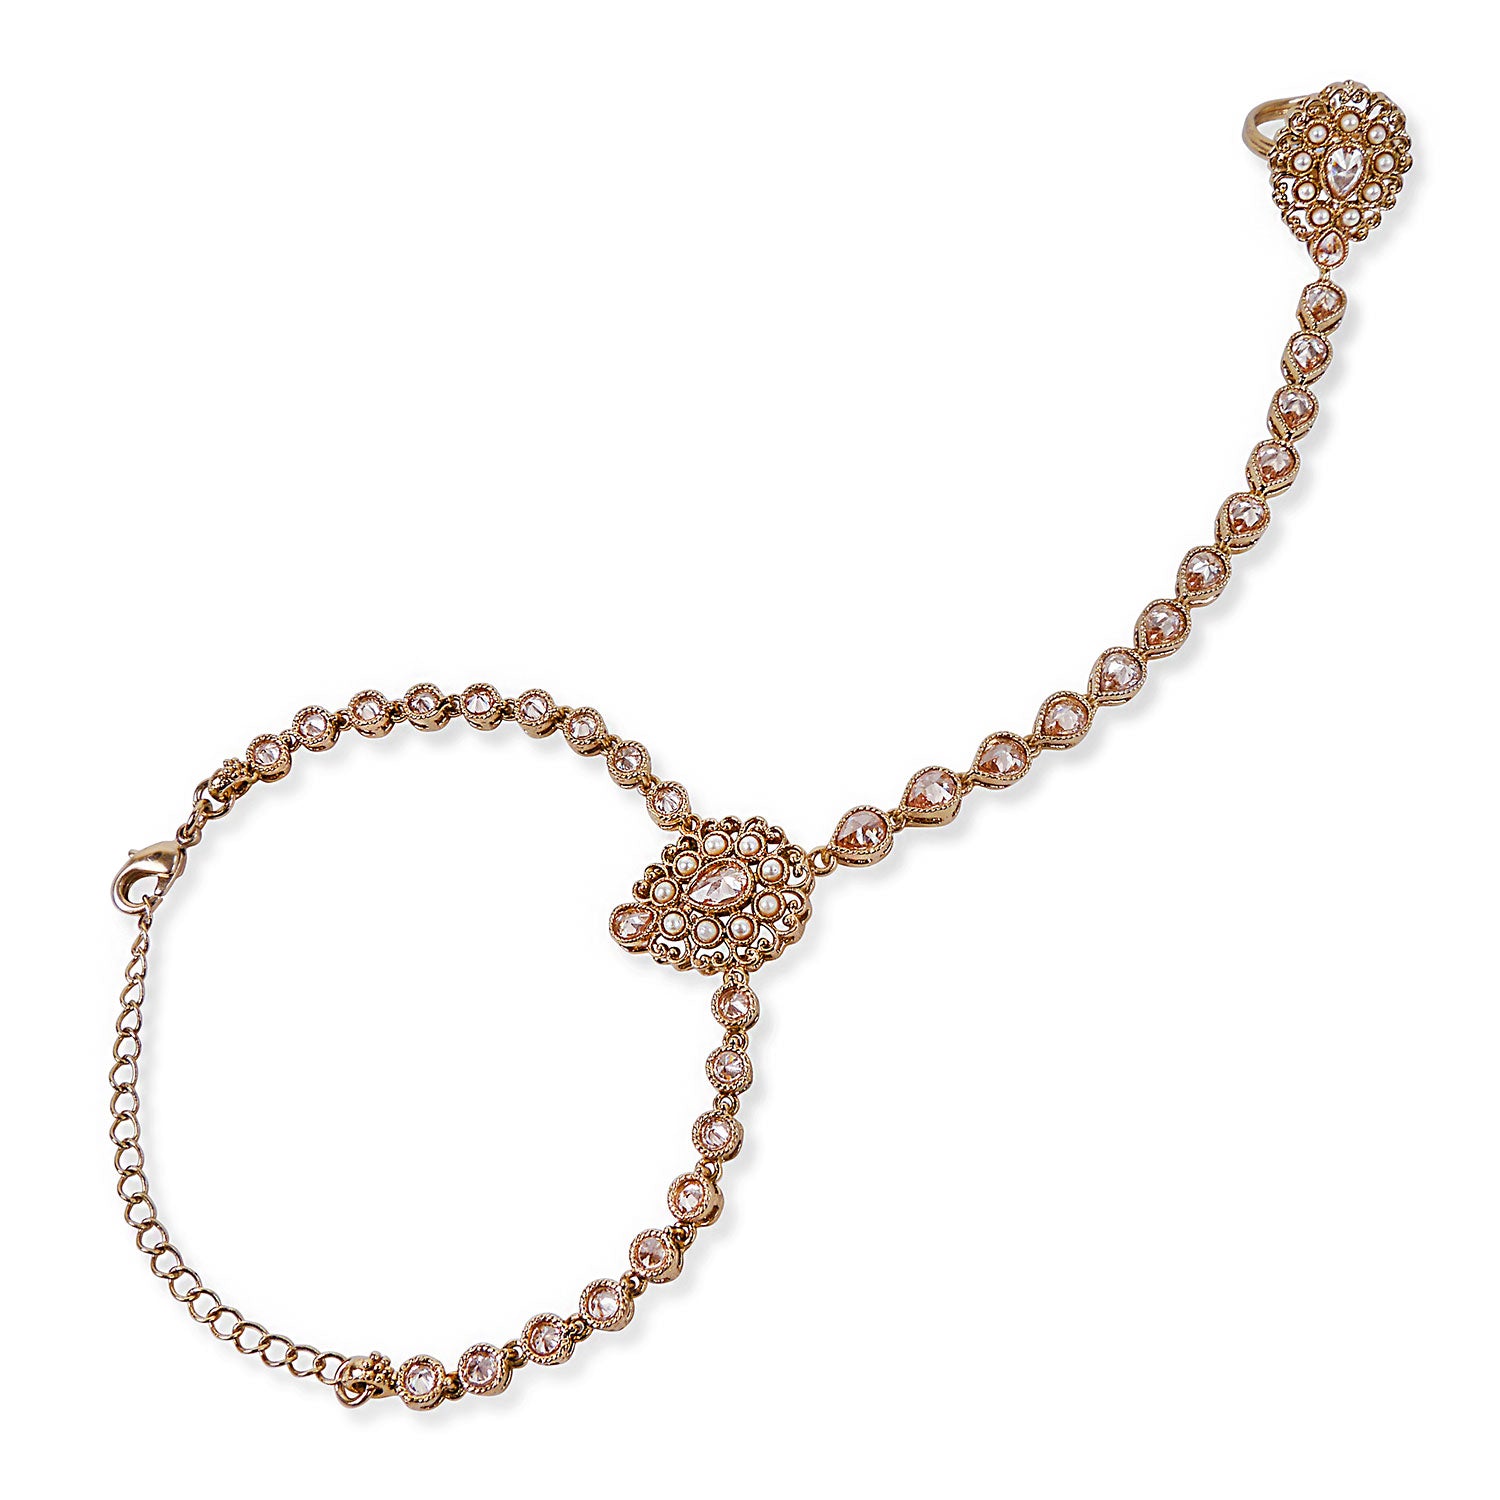 Double Teardrop Hand Chain in Pearl and Antique Gold